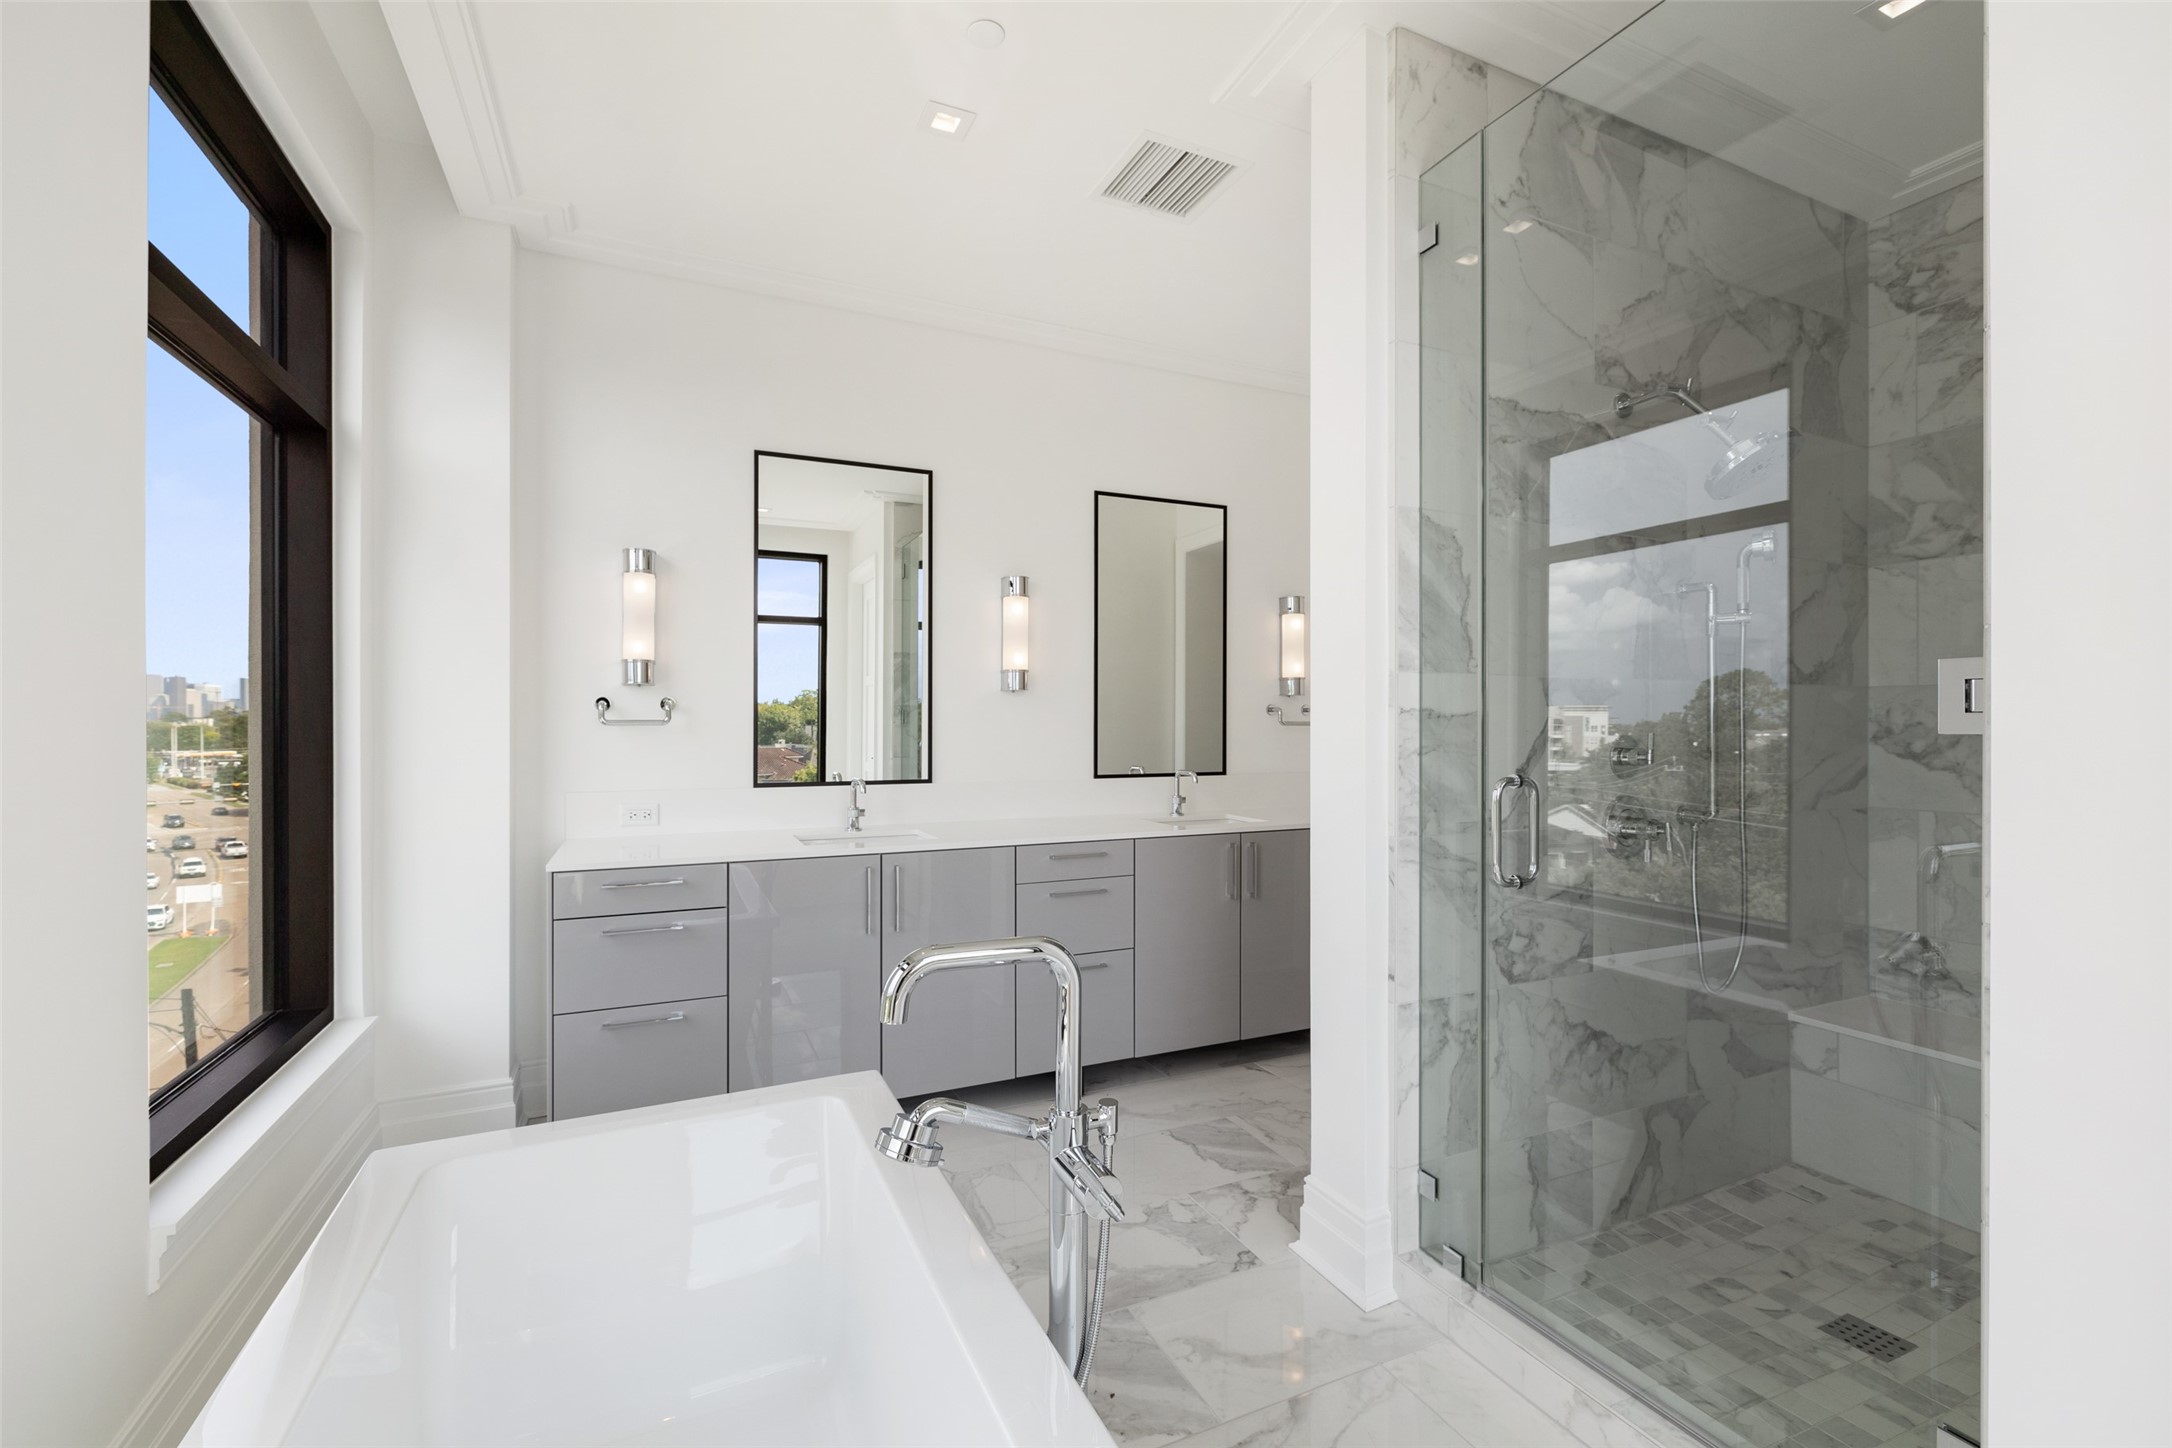 The Primary Bathroom also features a beautiful walk-in shower with bench.